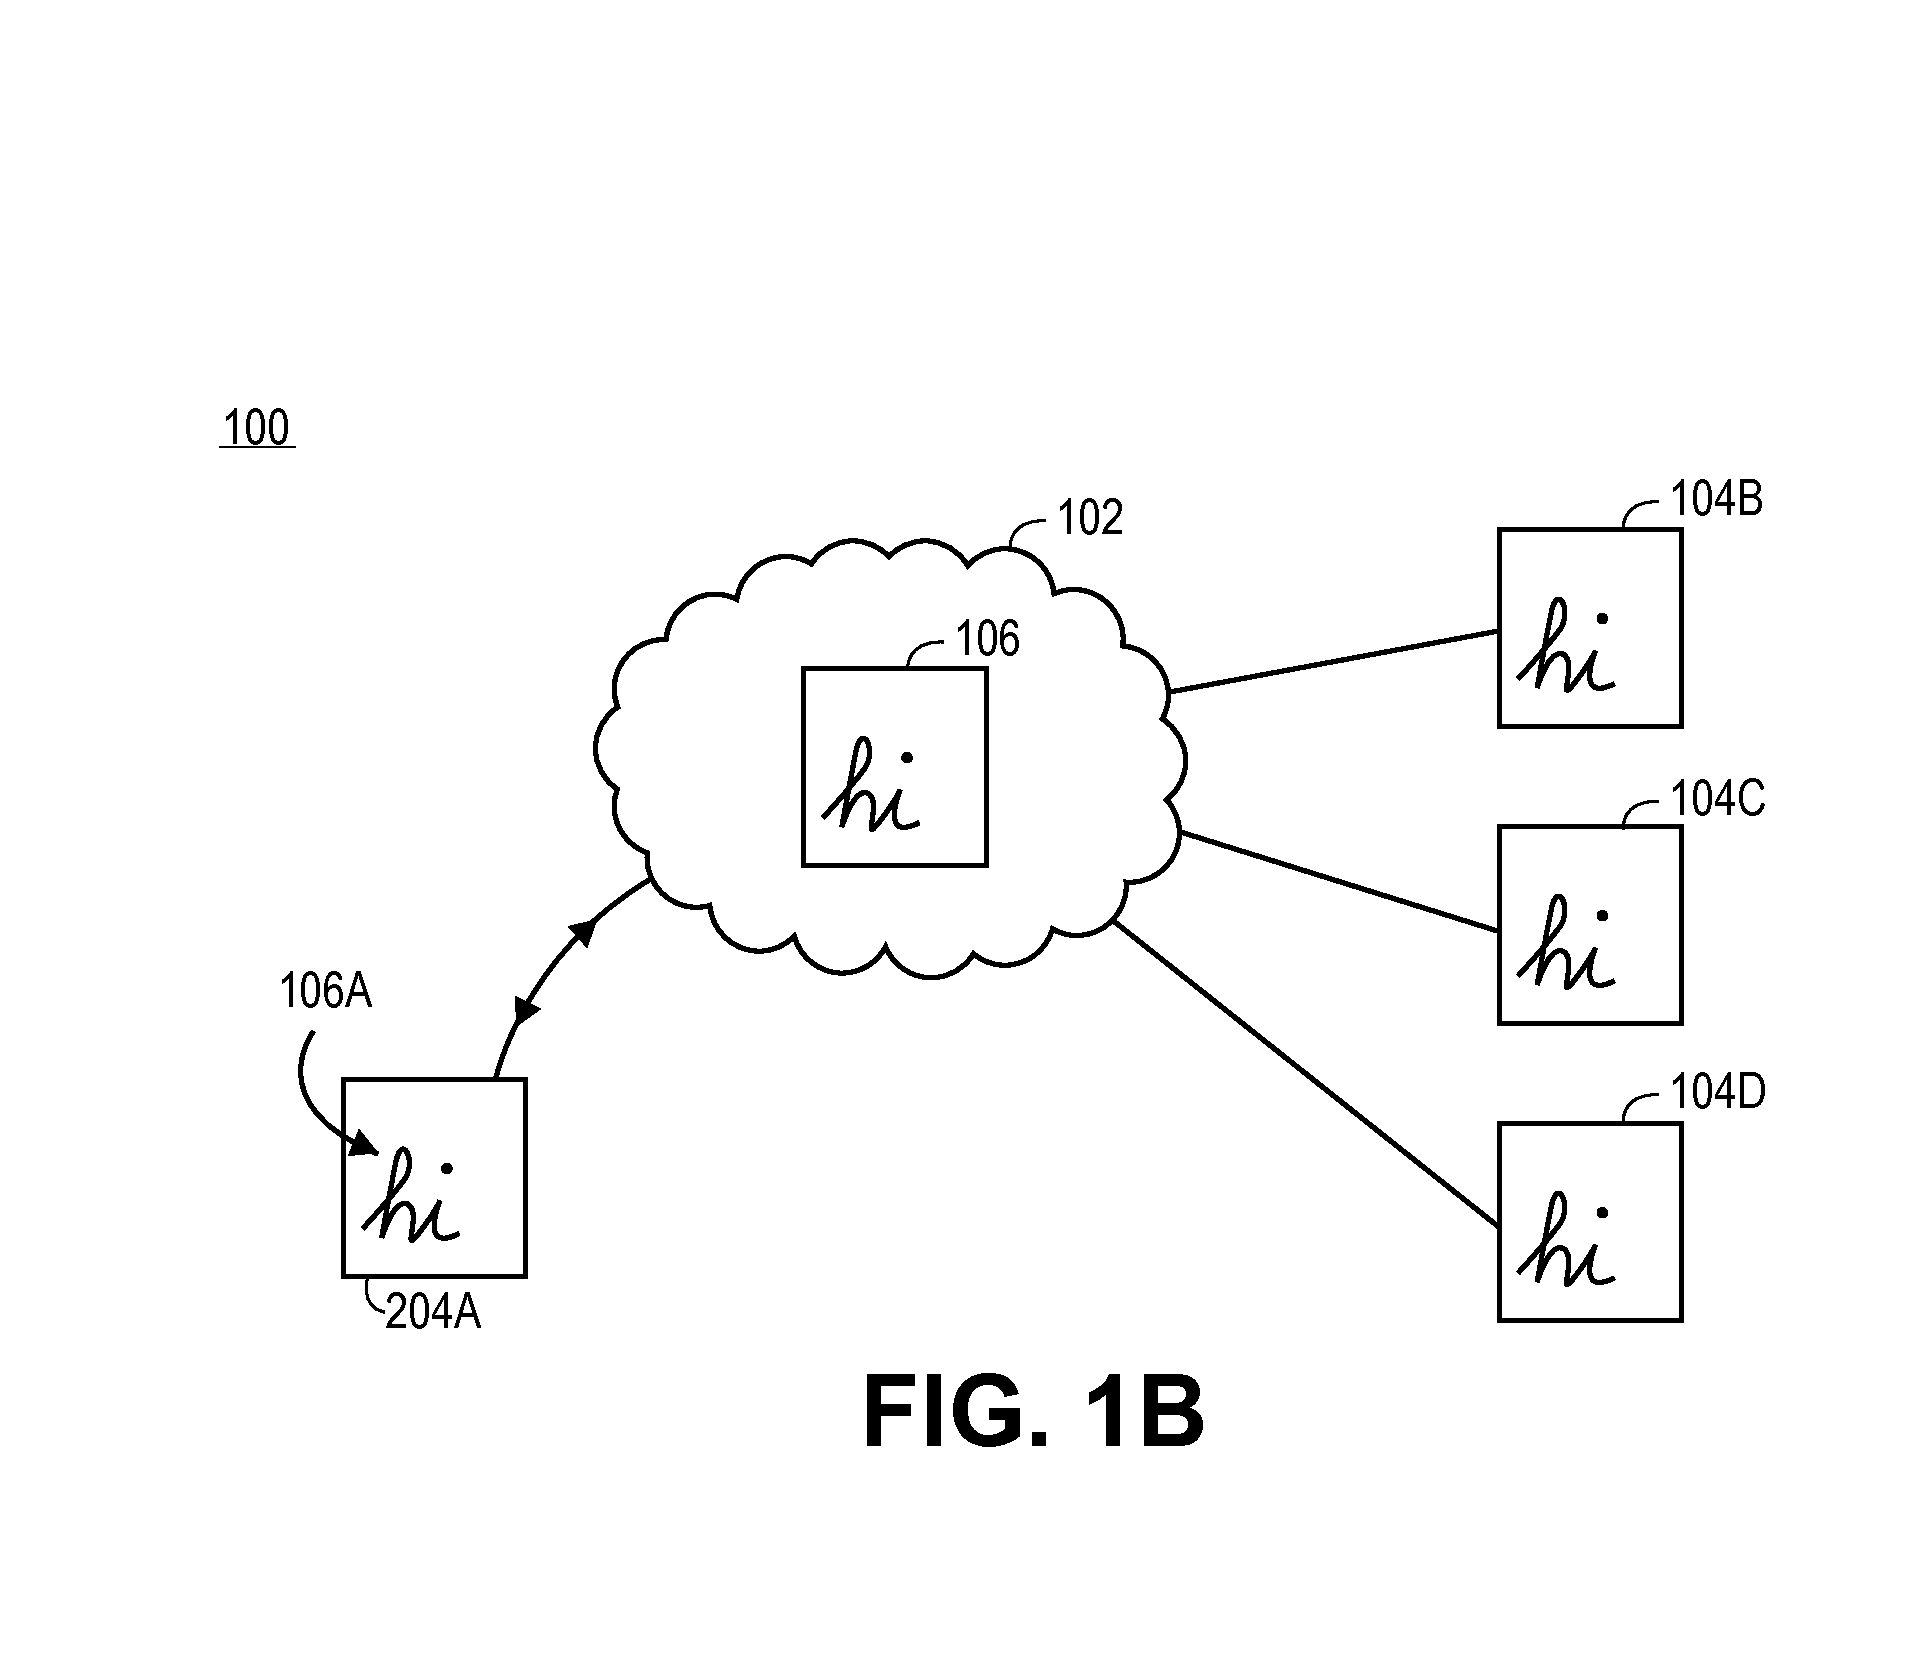 Cursor driven interface for layer control